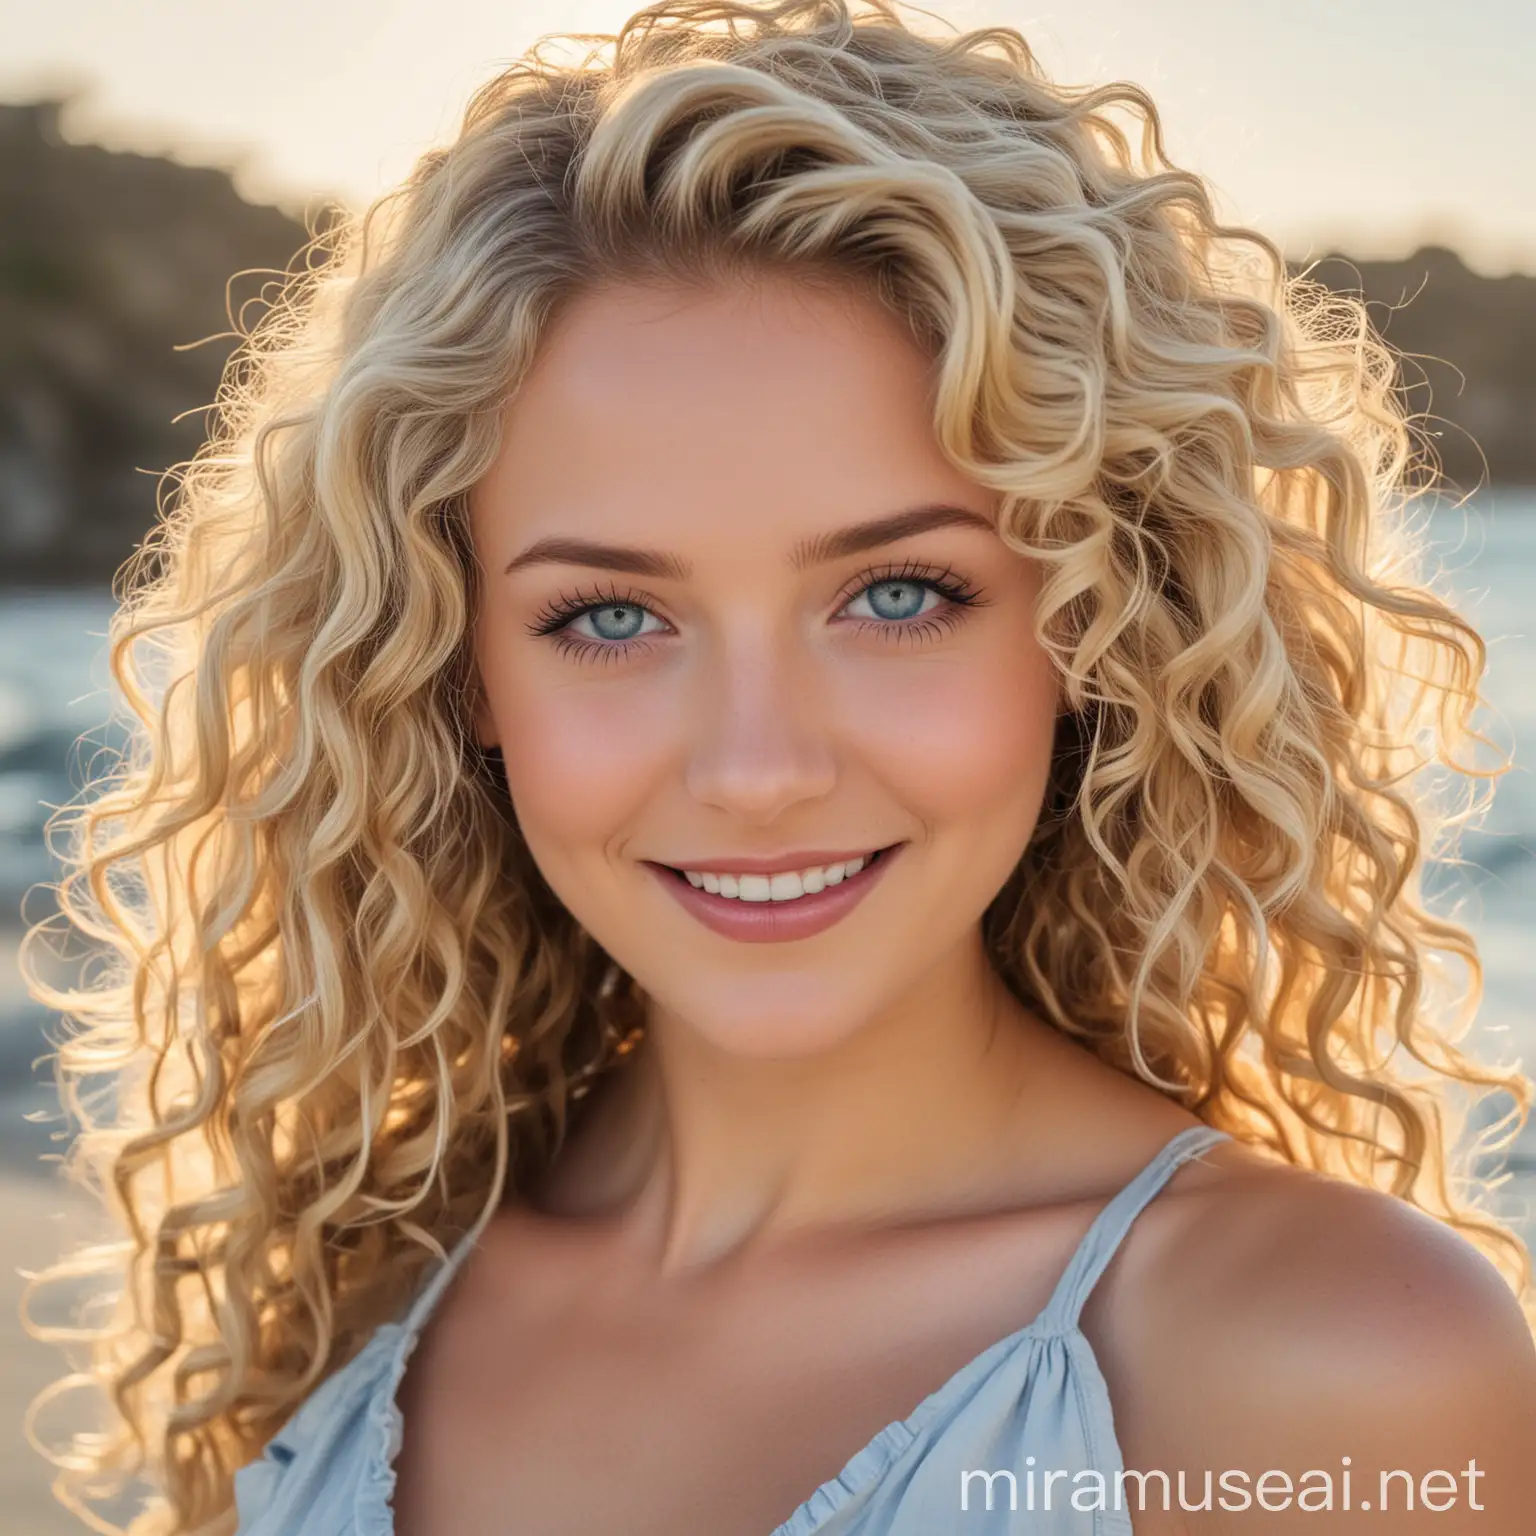 Stunning Young Blonde Women with Wavy Beach Curls and Pretty Smiles